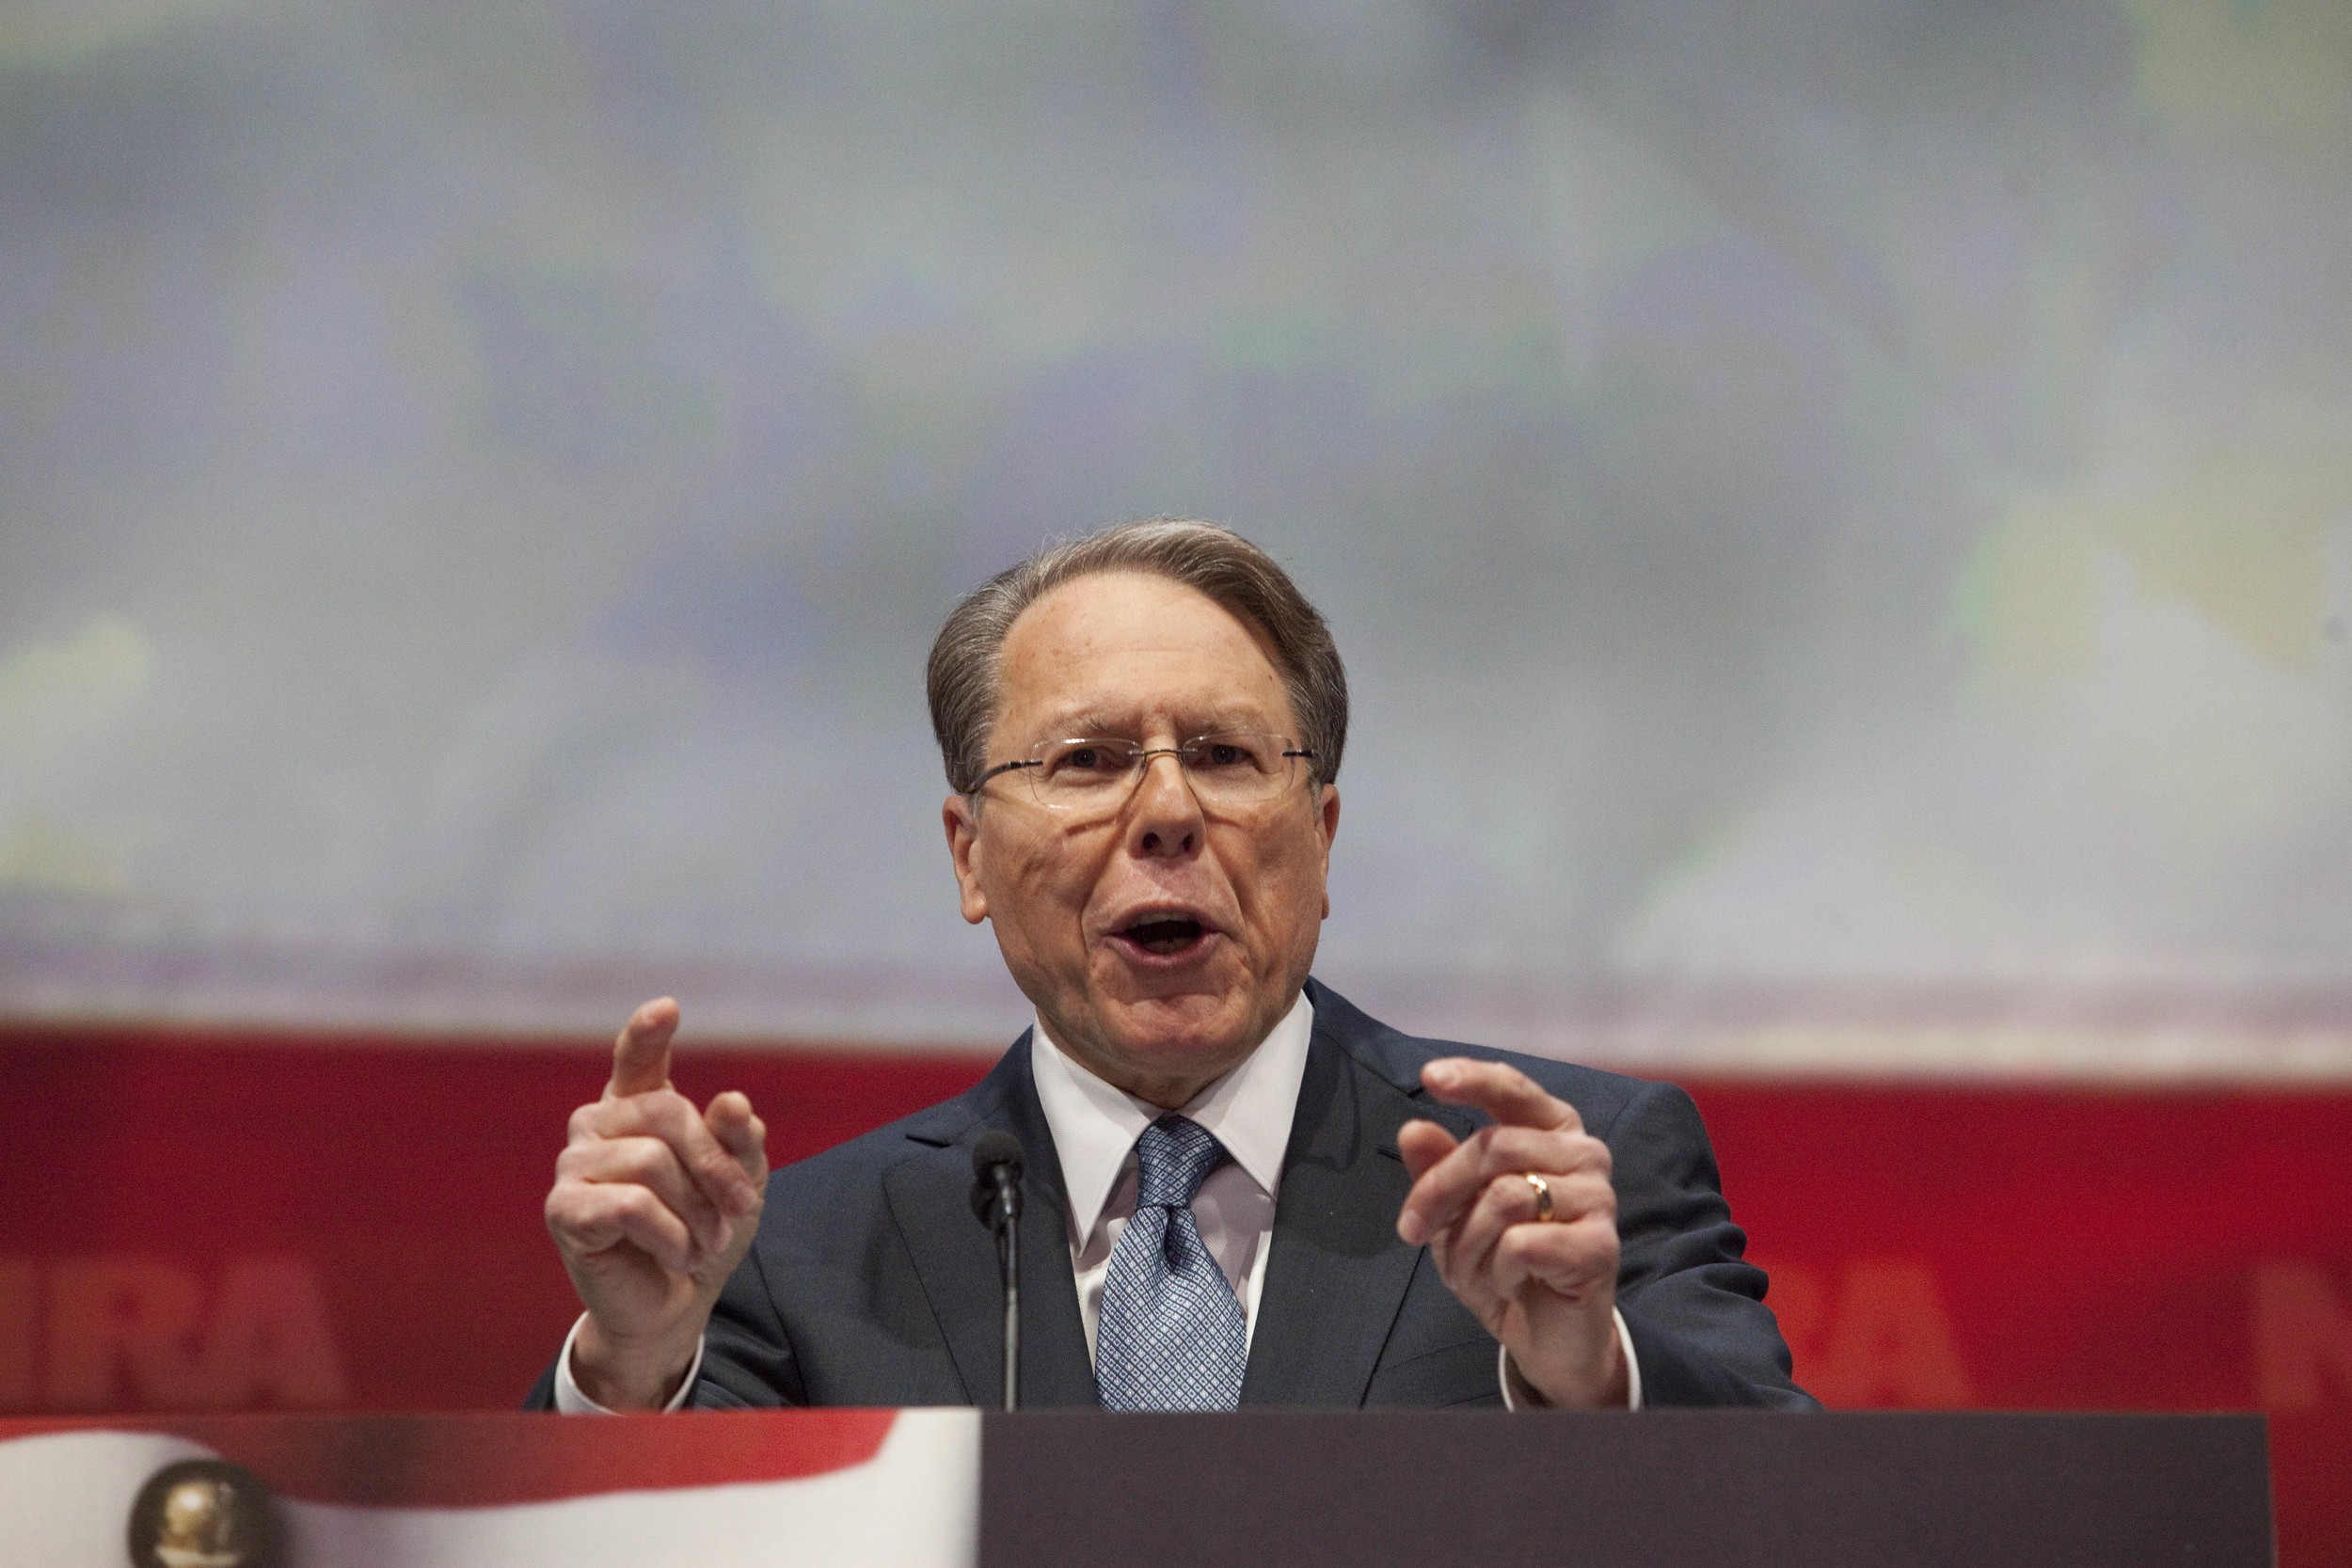  NRA vice president Wayne LaPierre speaks during the NRA-ILA Leadership Forum at the 2013 National Rifle Association Meeting and Exhibits May 3, 2013 in Houston. 